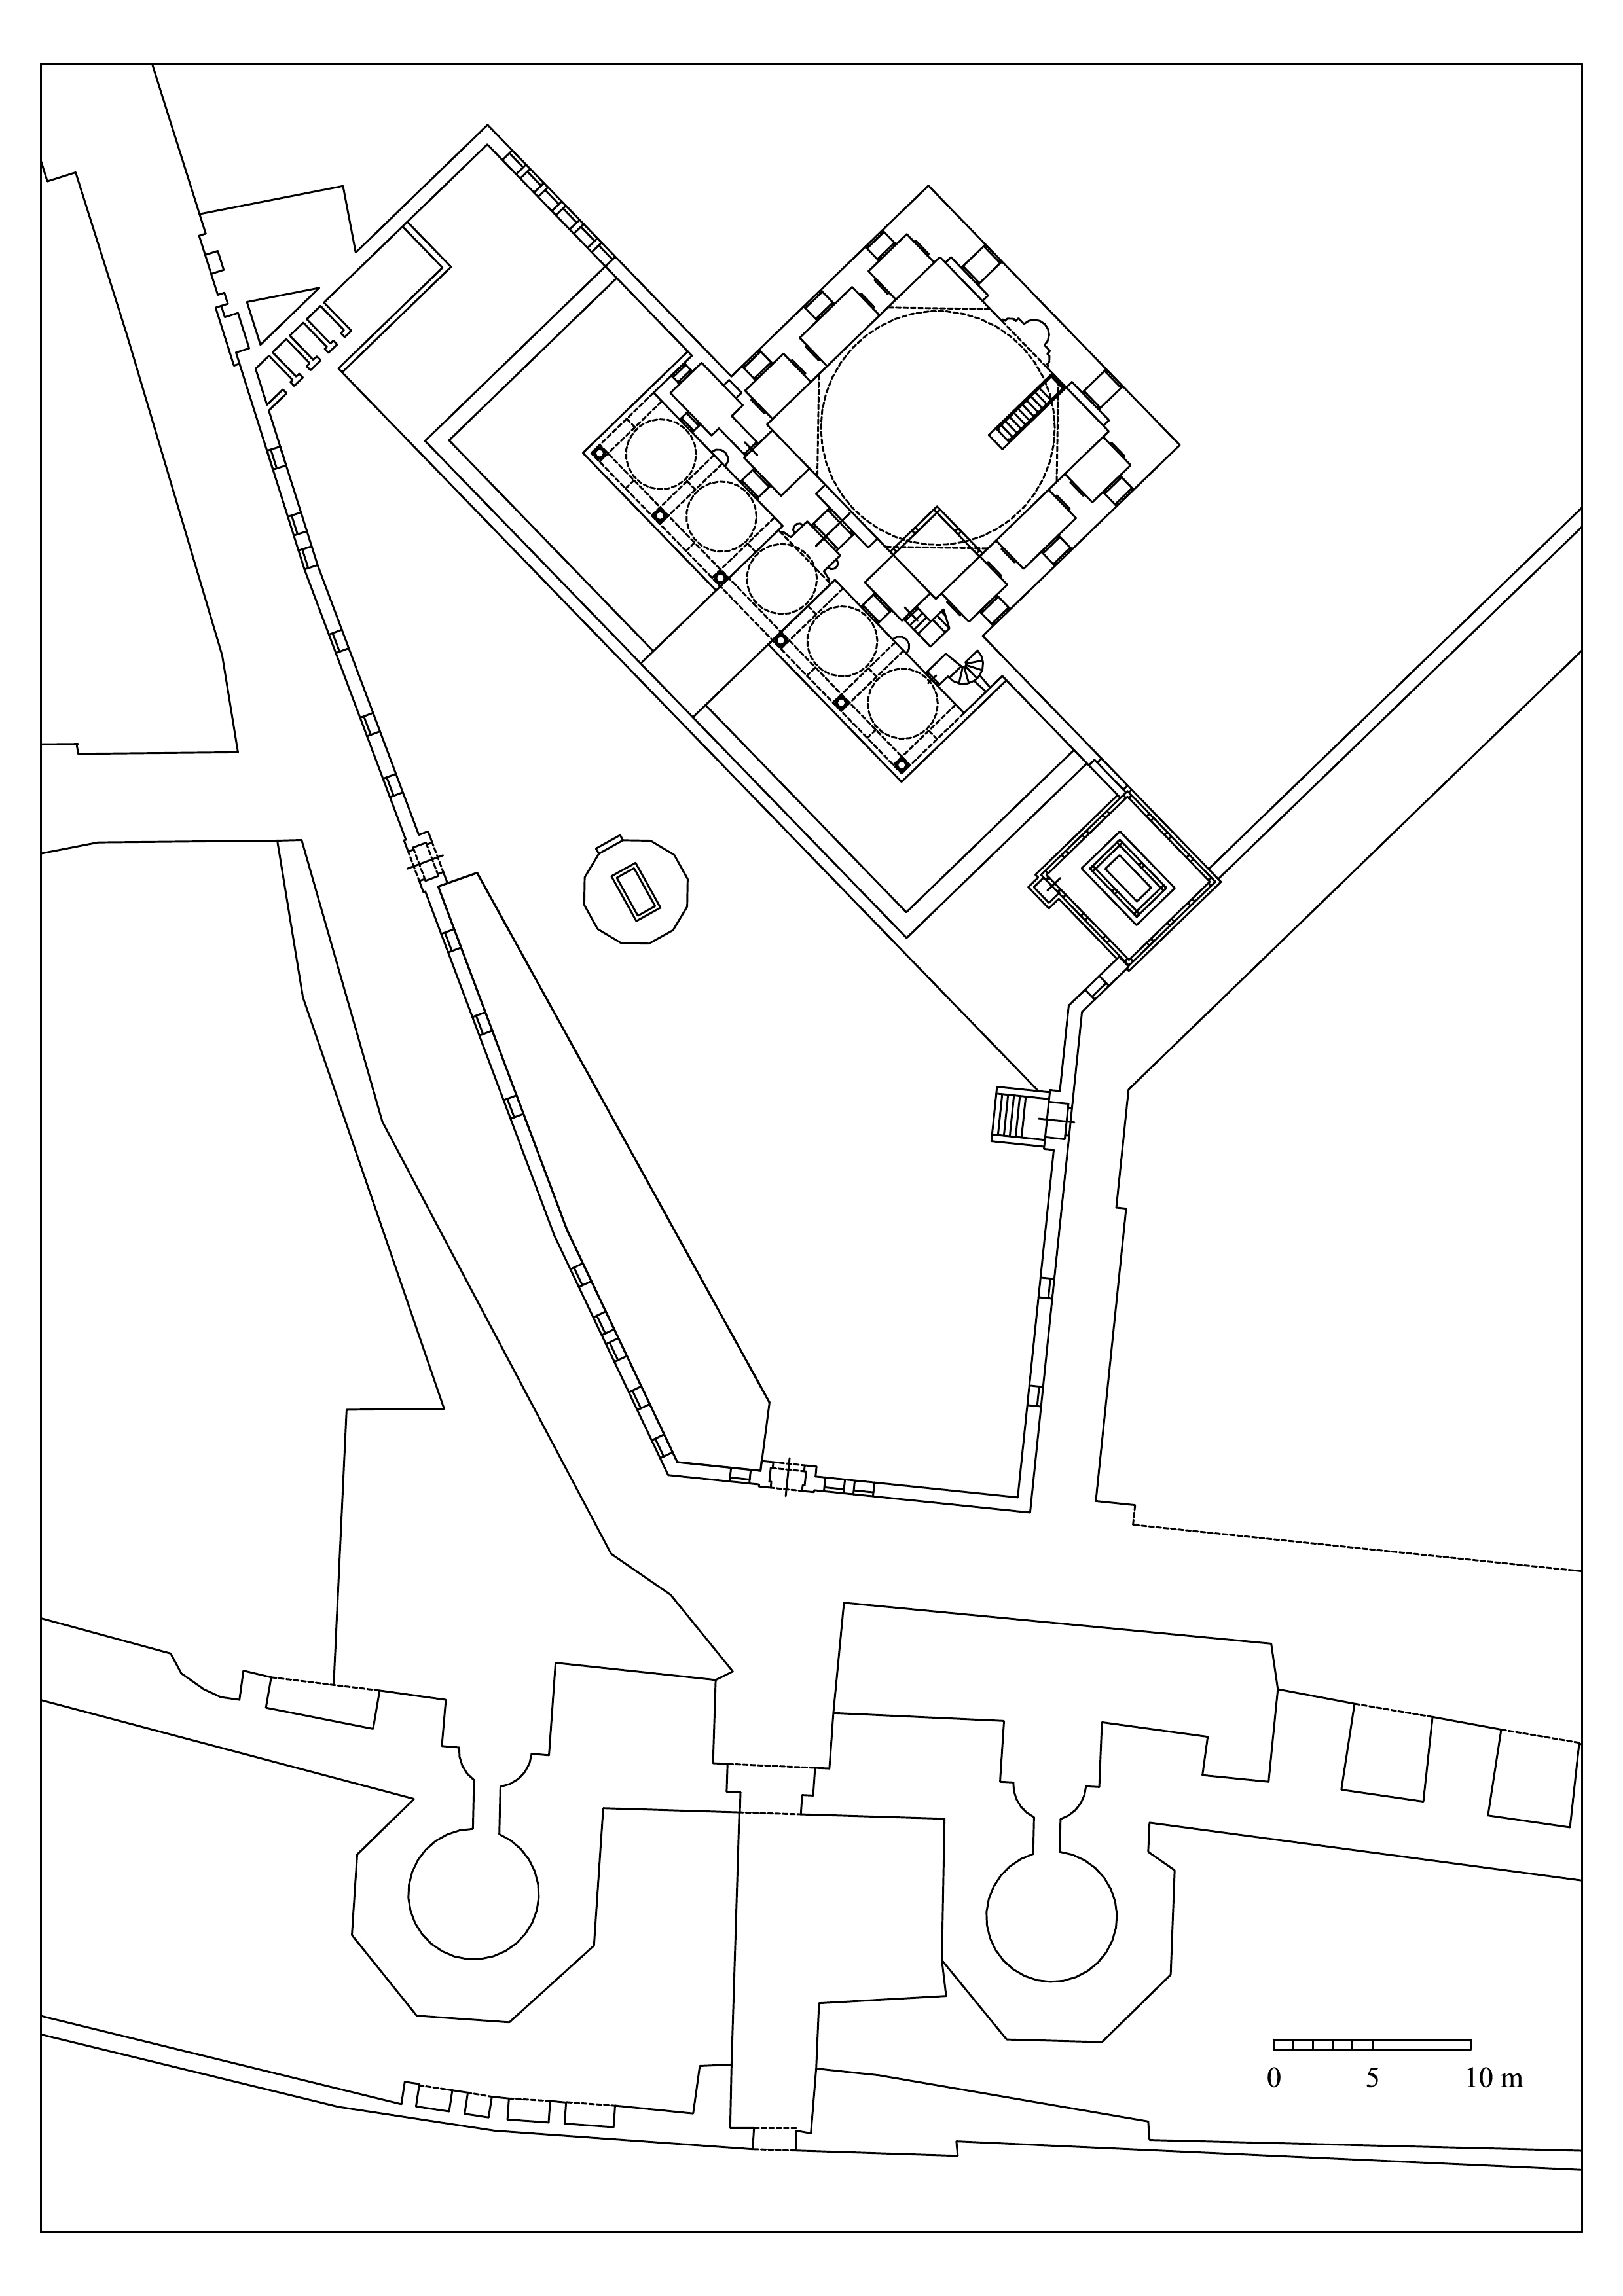 Hadım İbrahim Paşa Camii - Floor plan of mosque and mausoleum. DWG file in AutoCAD 2000 format. Click the download button to download a zipped file containing the .dwg file.